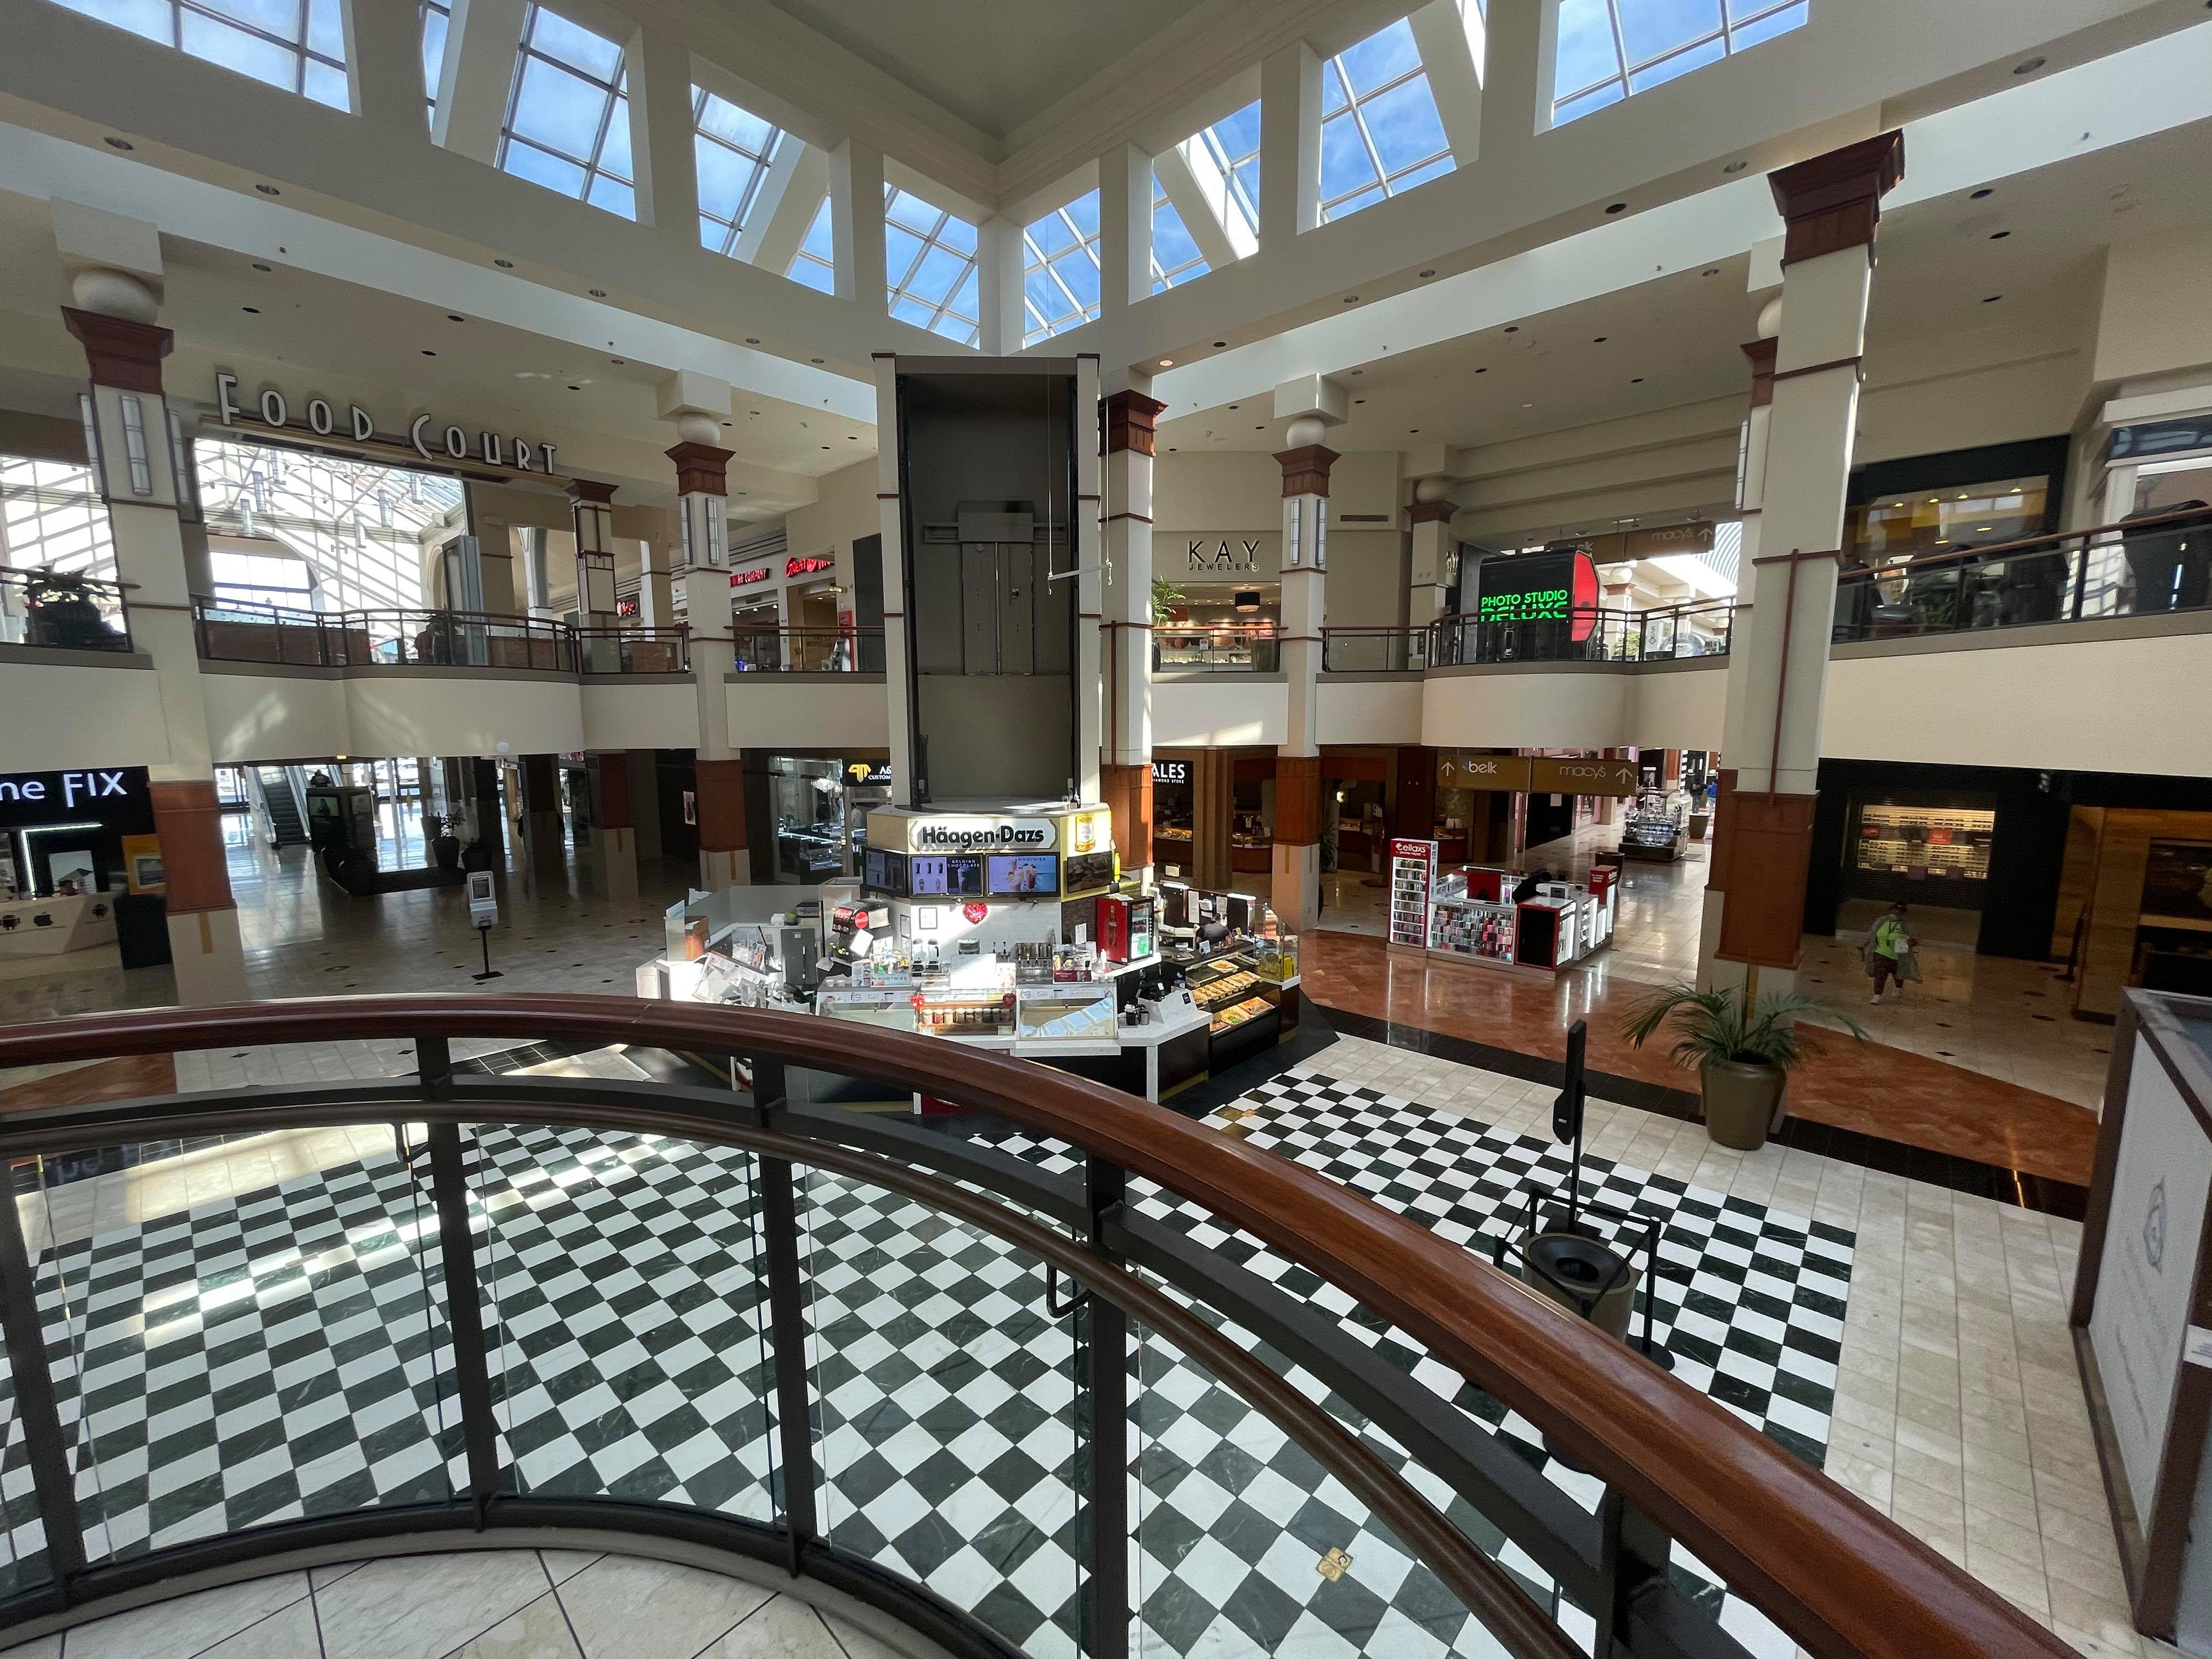 Town Center at Cobb could become latest mall redevelopment year after  foreclosure - Atlanta Business Chronicle